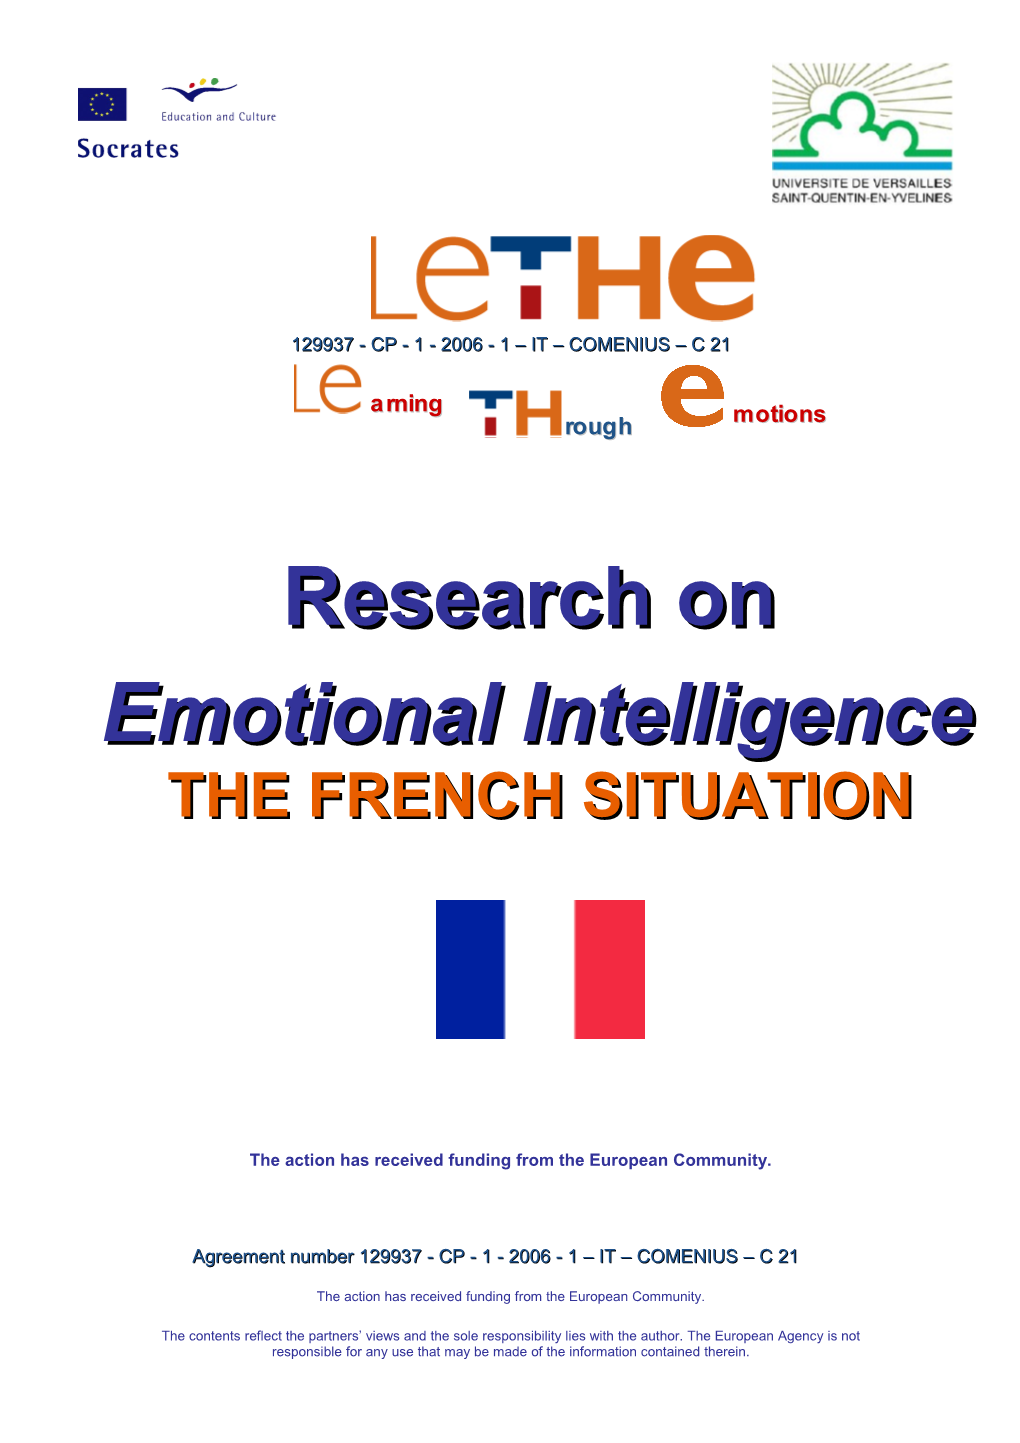 LETHE (Learning Through Emotions)